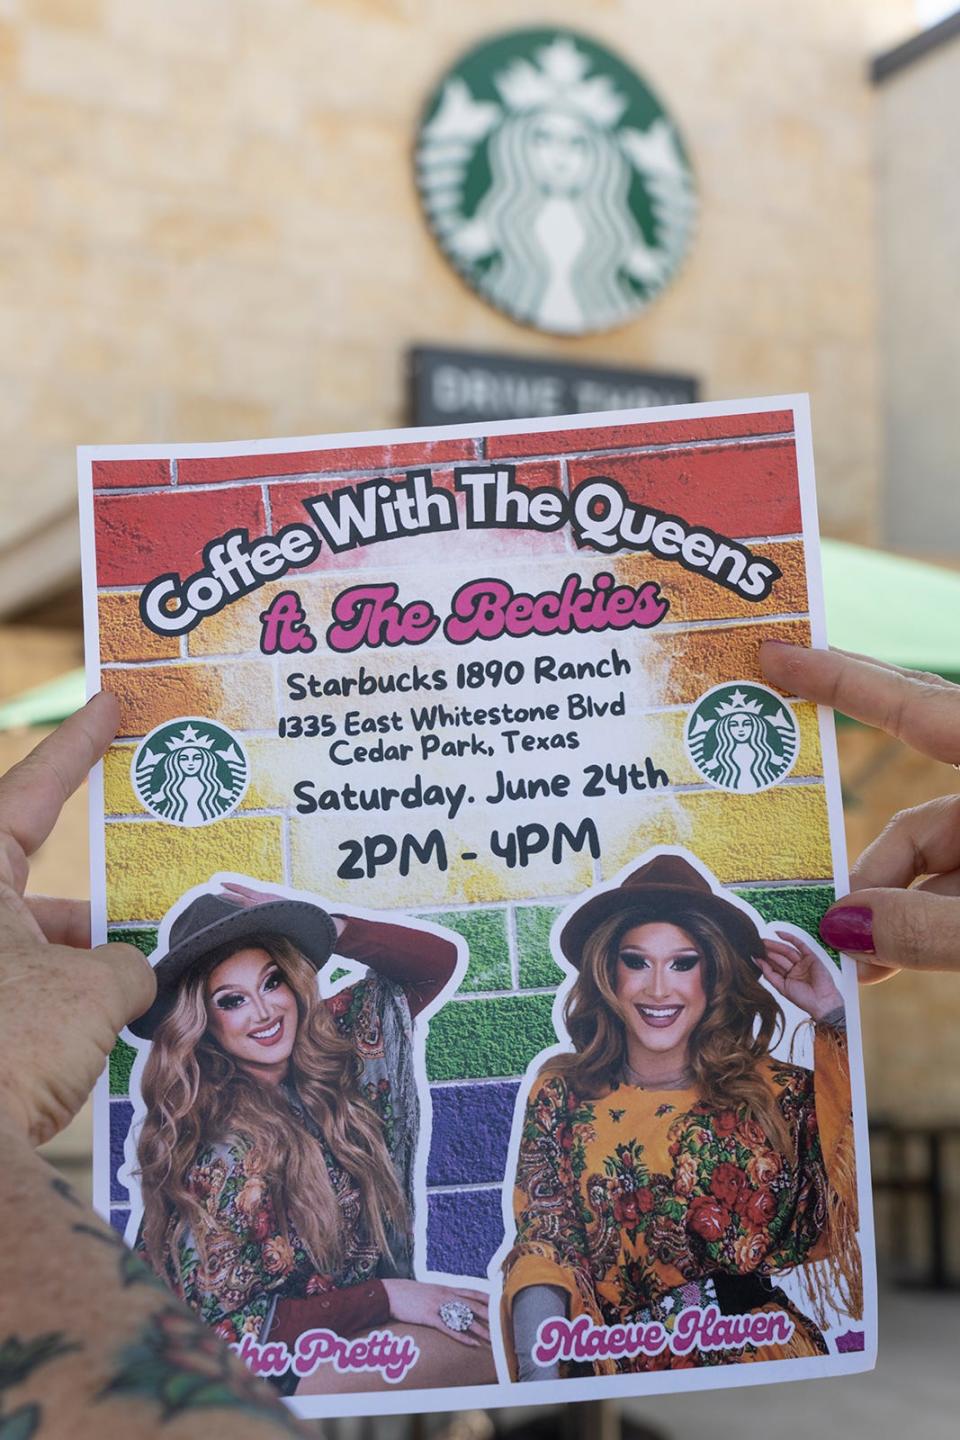 The drag queen event at a Starbucks in Cedar Park was canceled last weekend because of threats the store received over it.